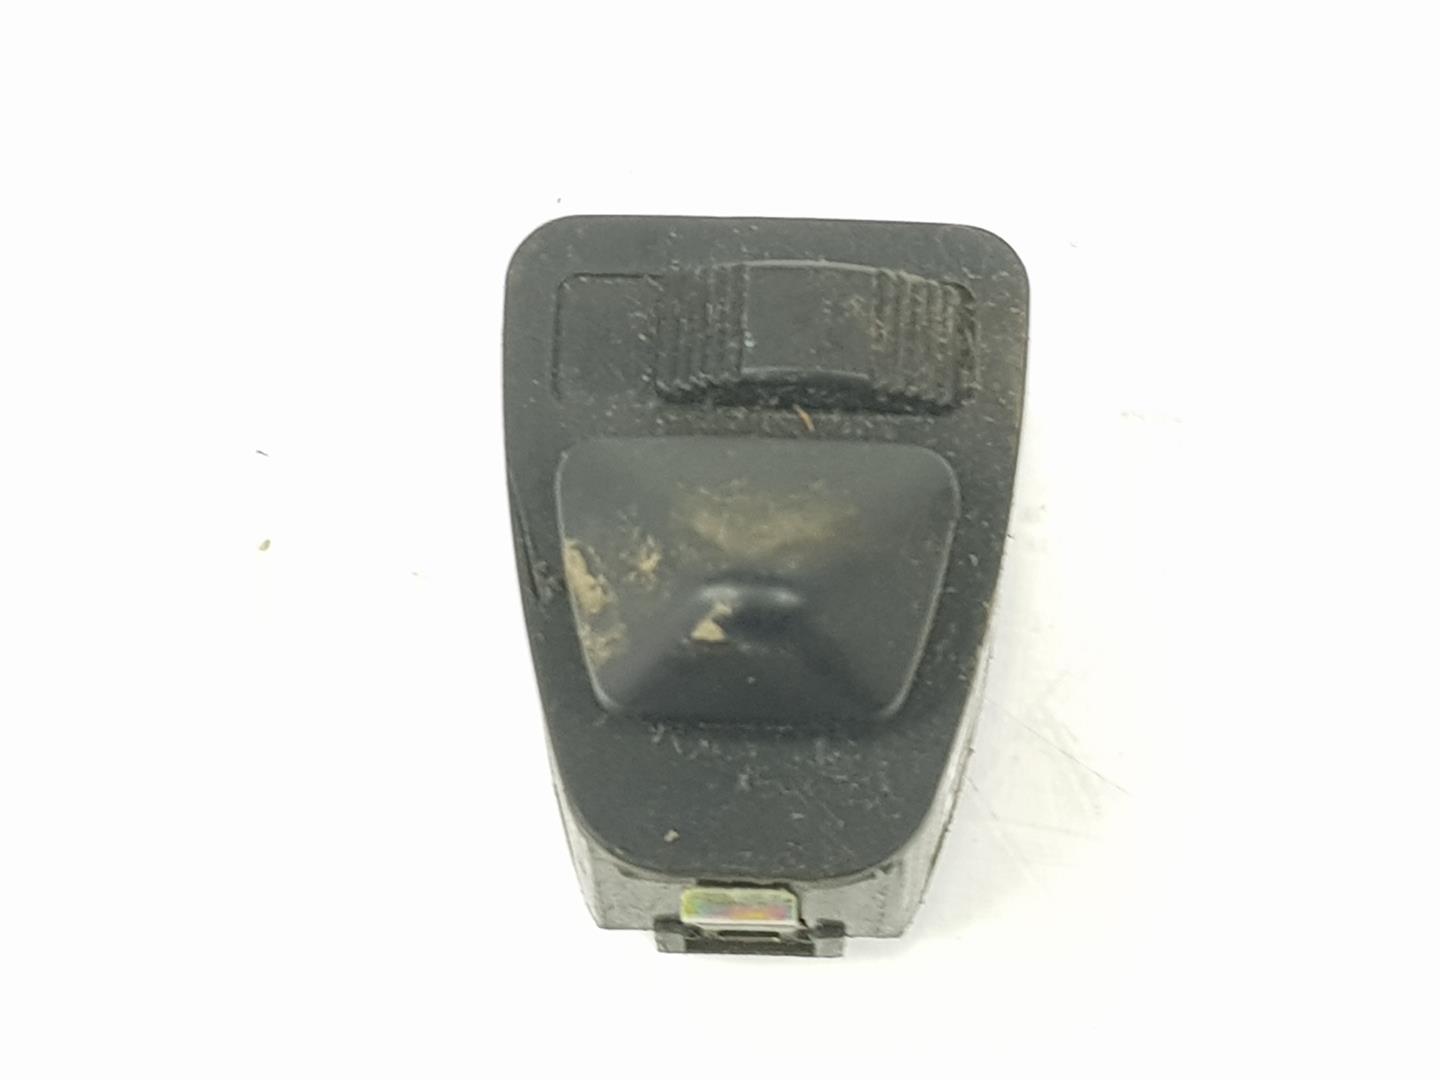 BMW 3 Series E46 (1997-2006) Other Control Units 61318373691, 8373691 19893195